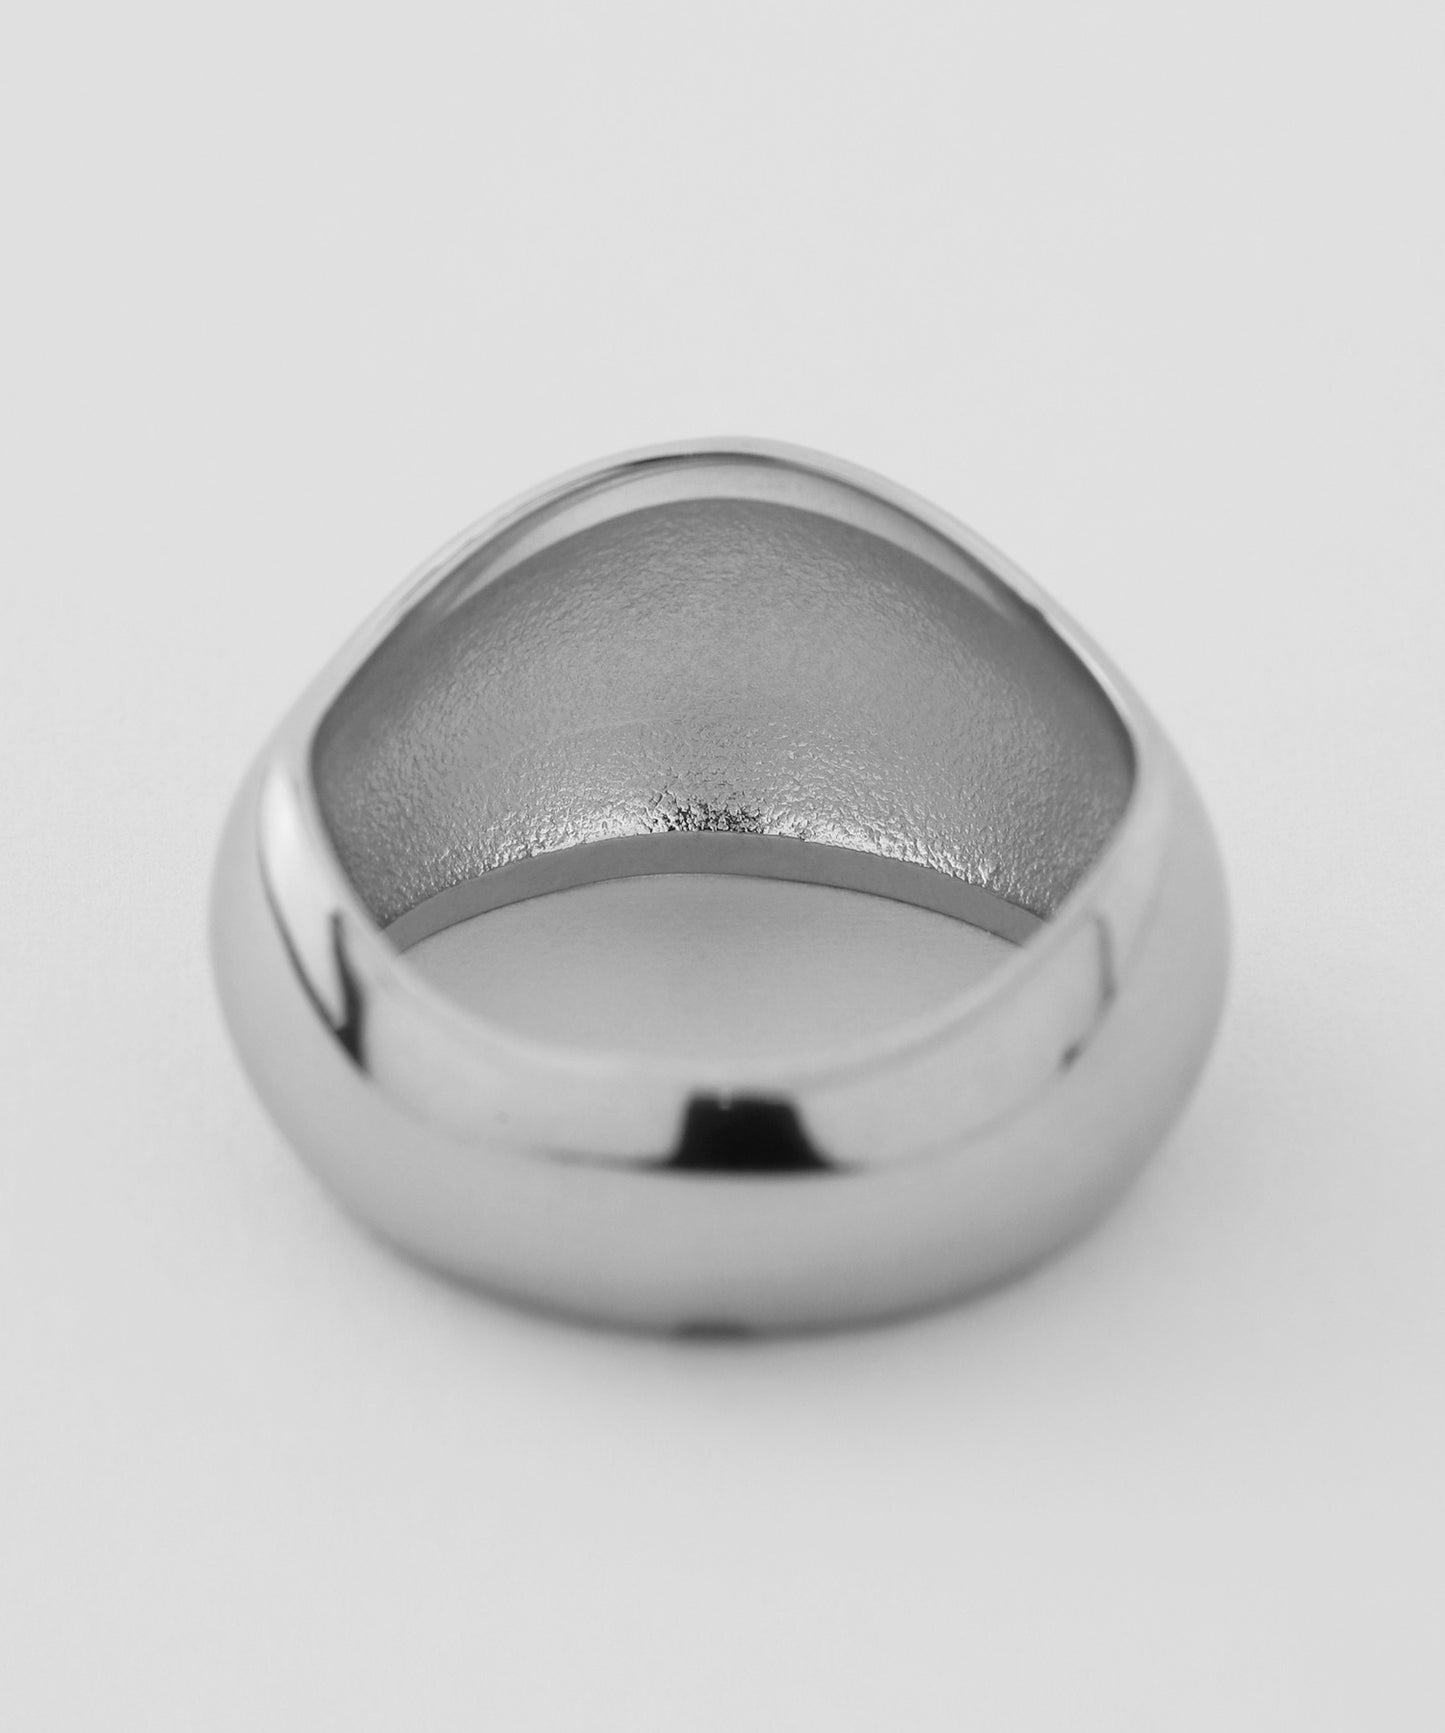 【Stainless Steel IP】Nuance Volume Ring